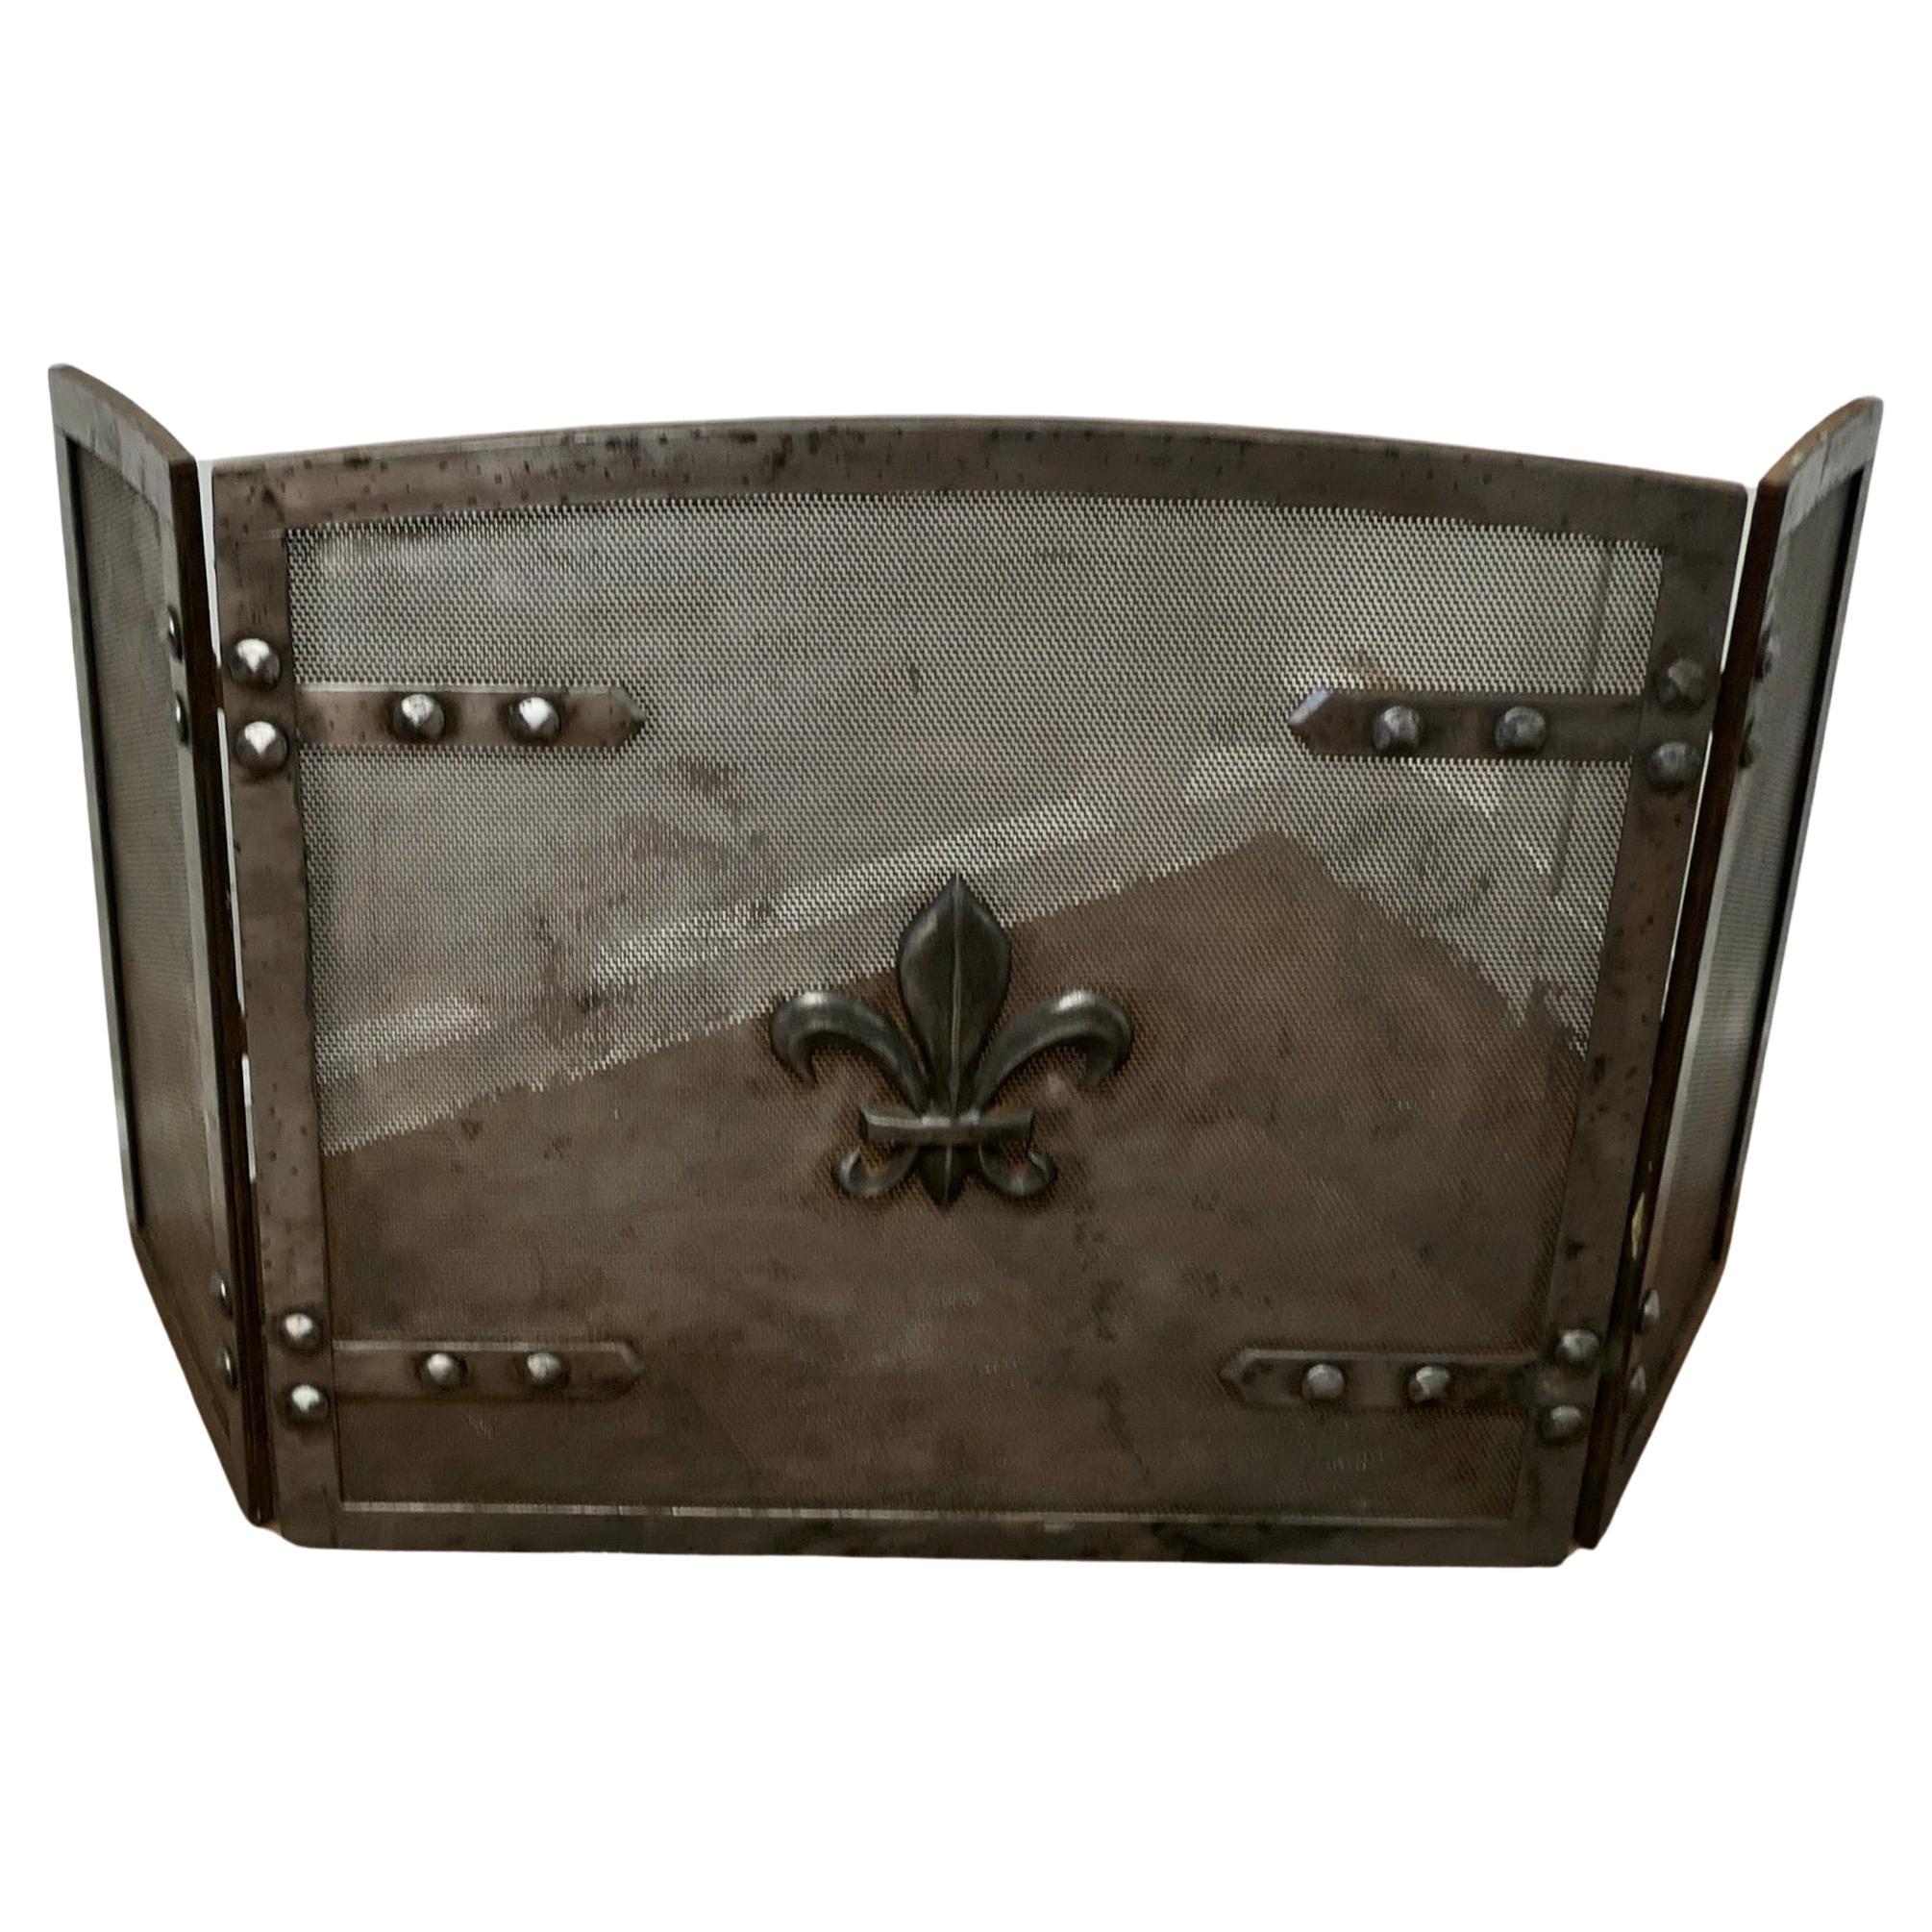 Heavy Arts and Crafts Steel Fire Guard for Inglenook Fireplace   